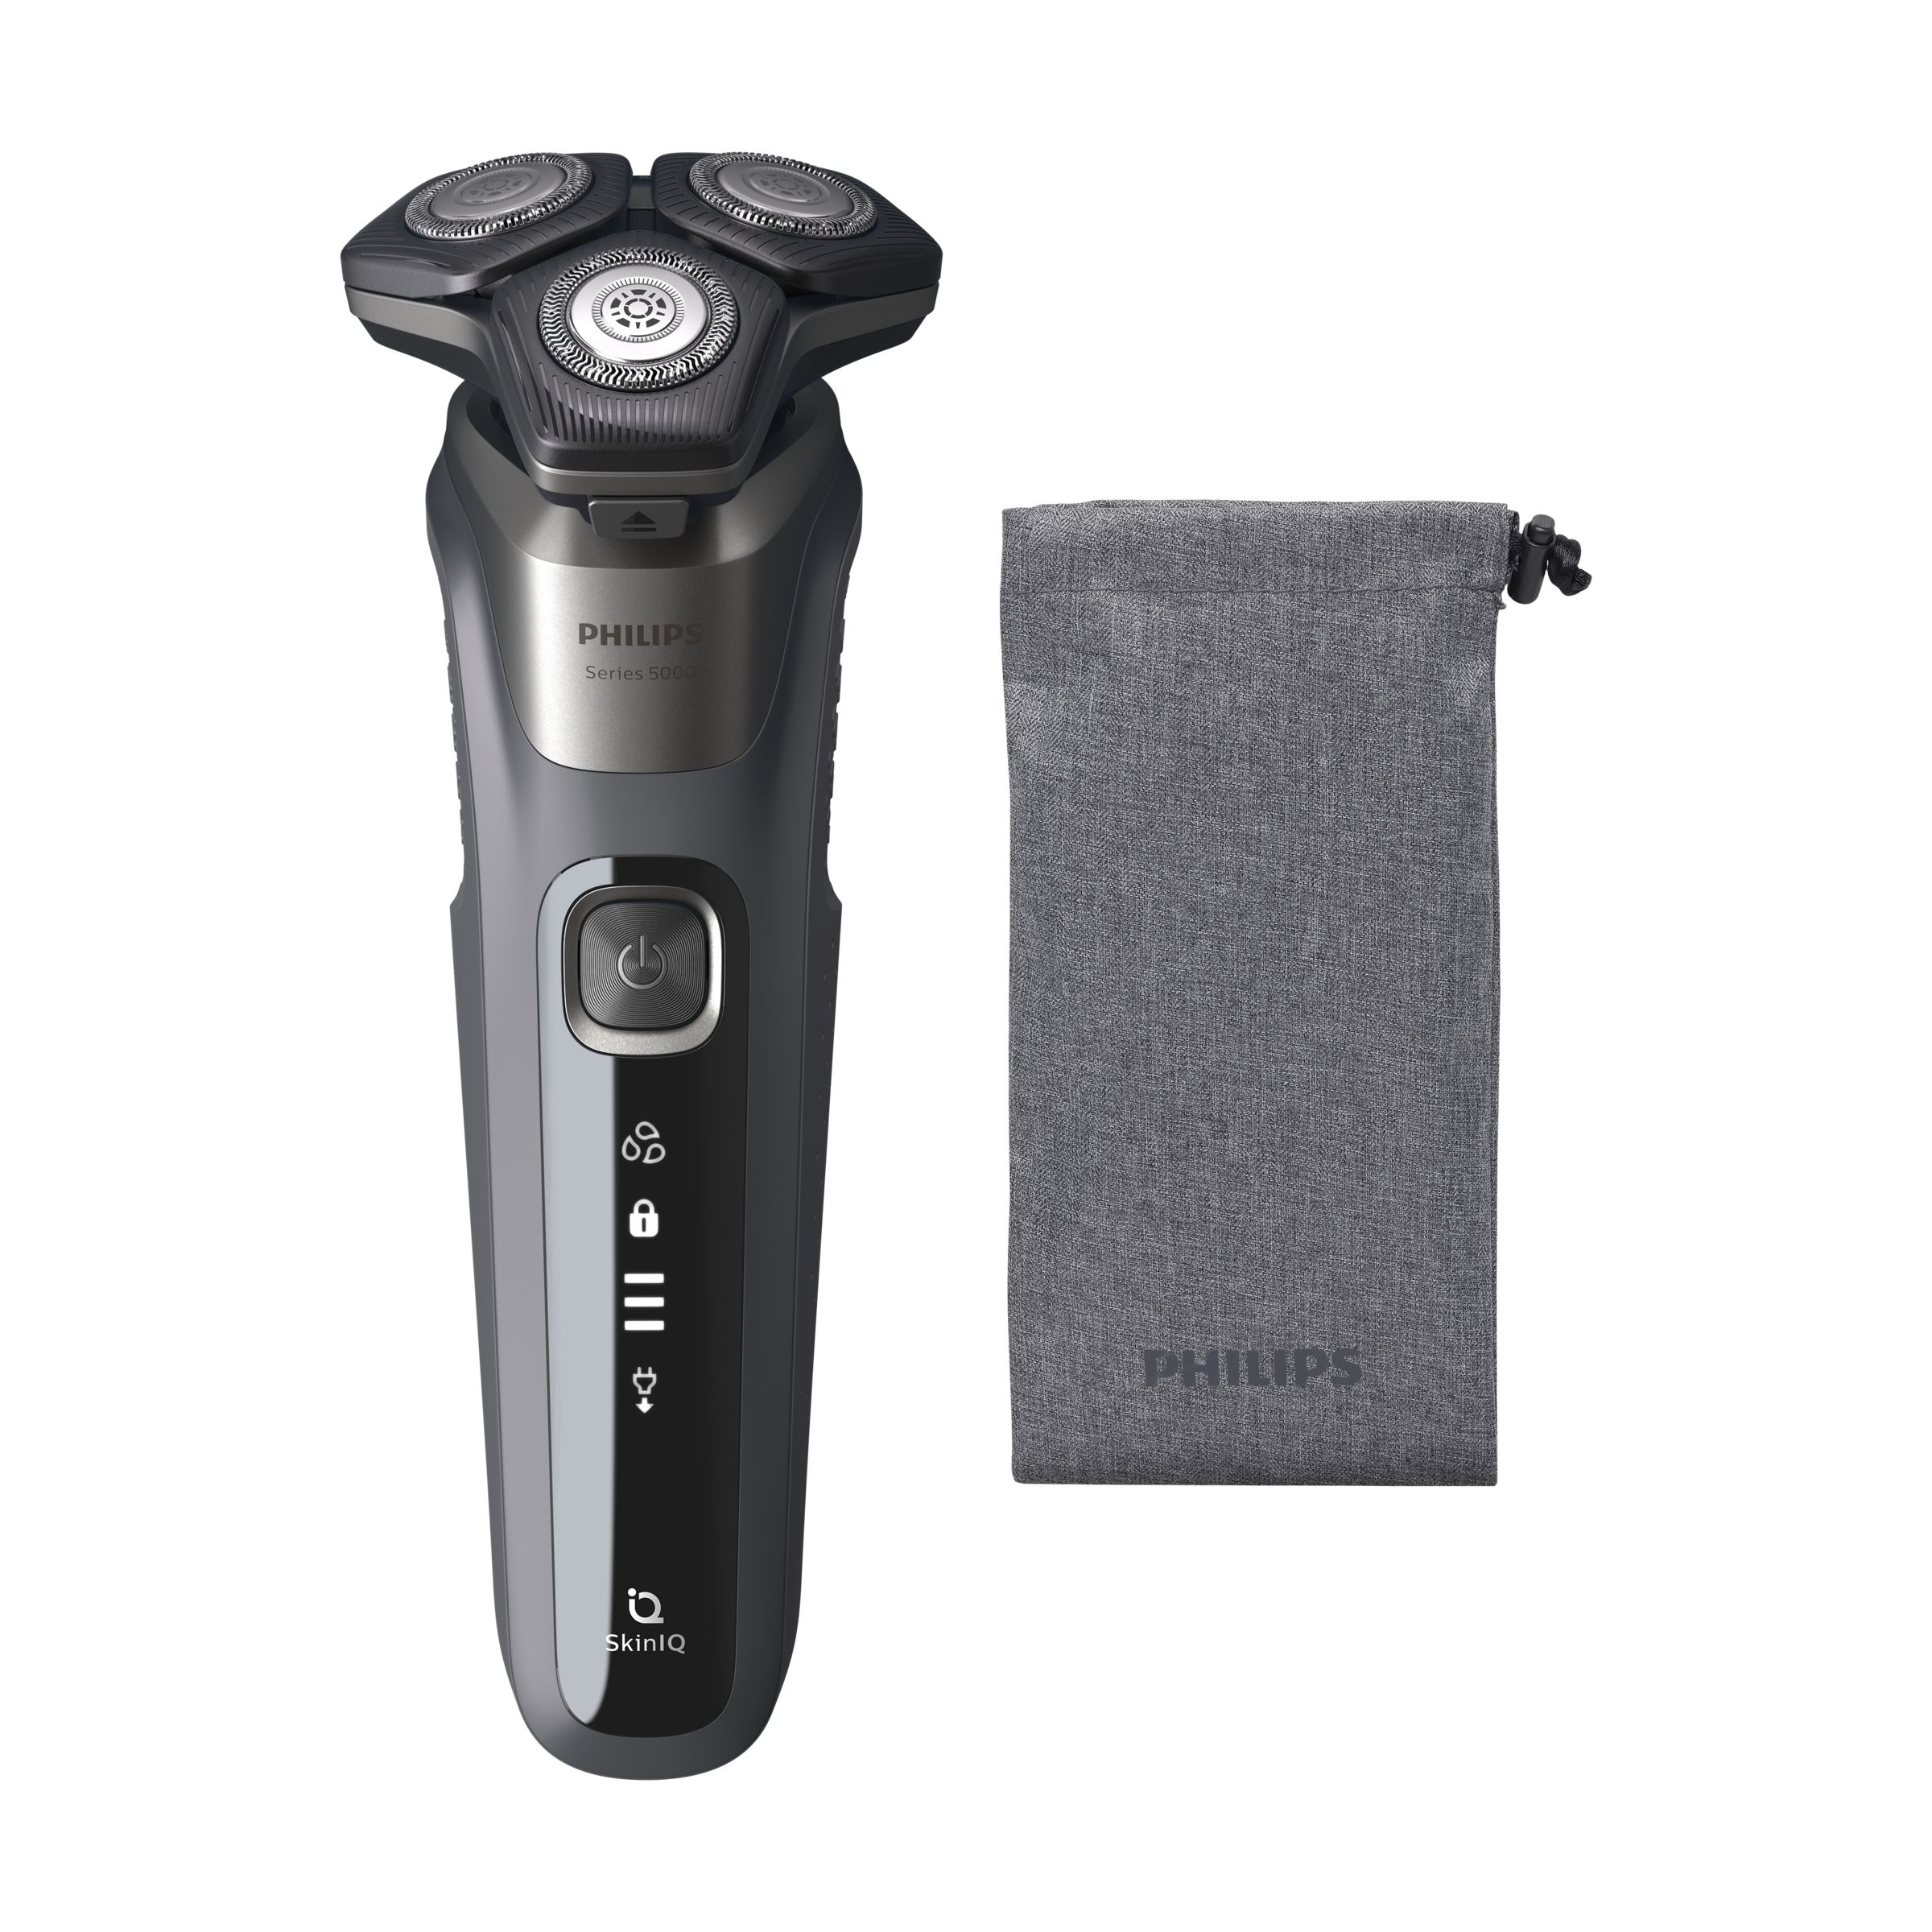 S5587/10 Shaver